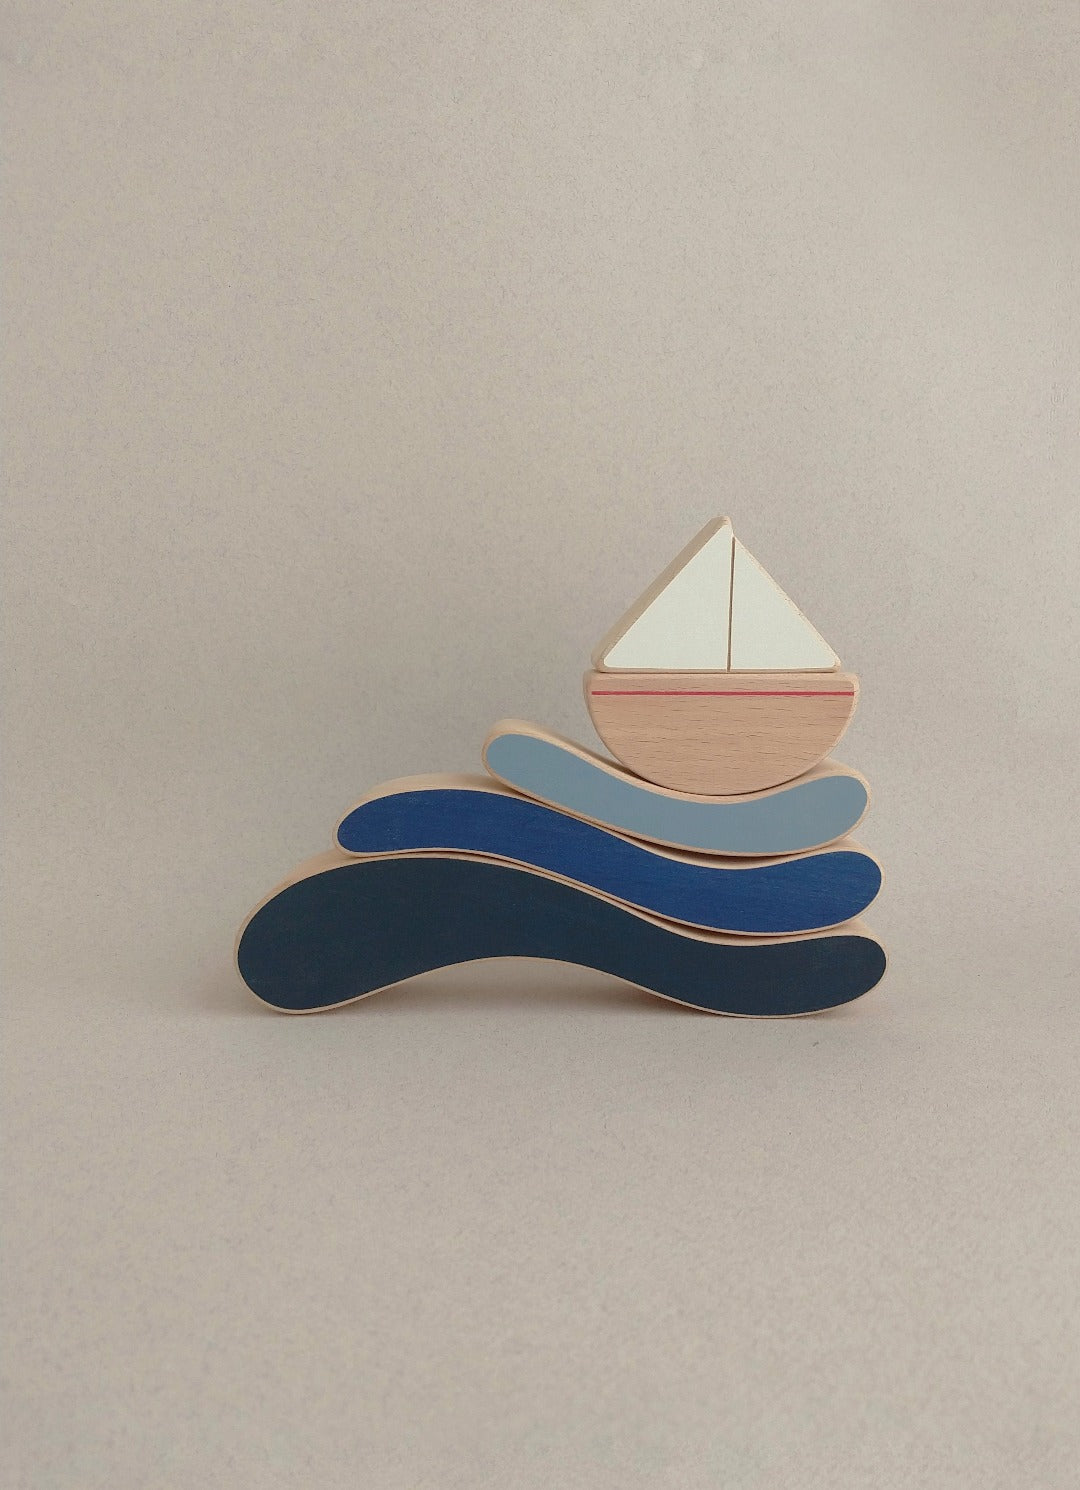 The boat & waves stacking toy is a minimalistic design that combines soft curves and colours with satin smooth natural wood surfaces.